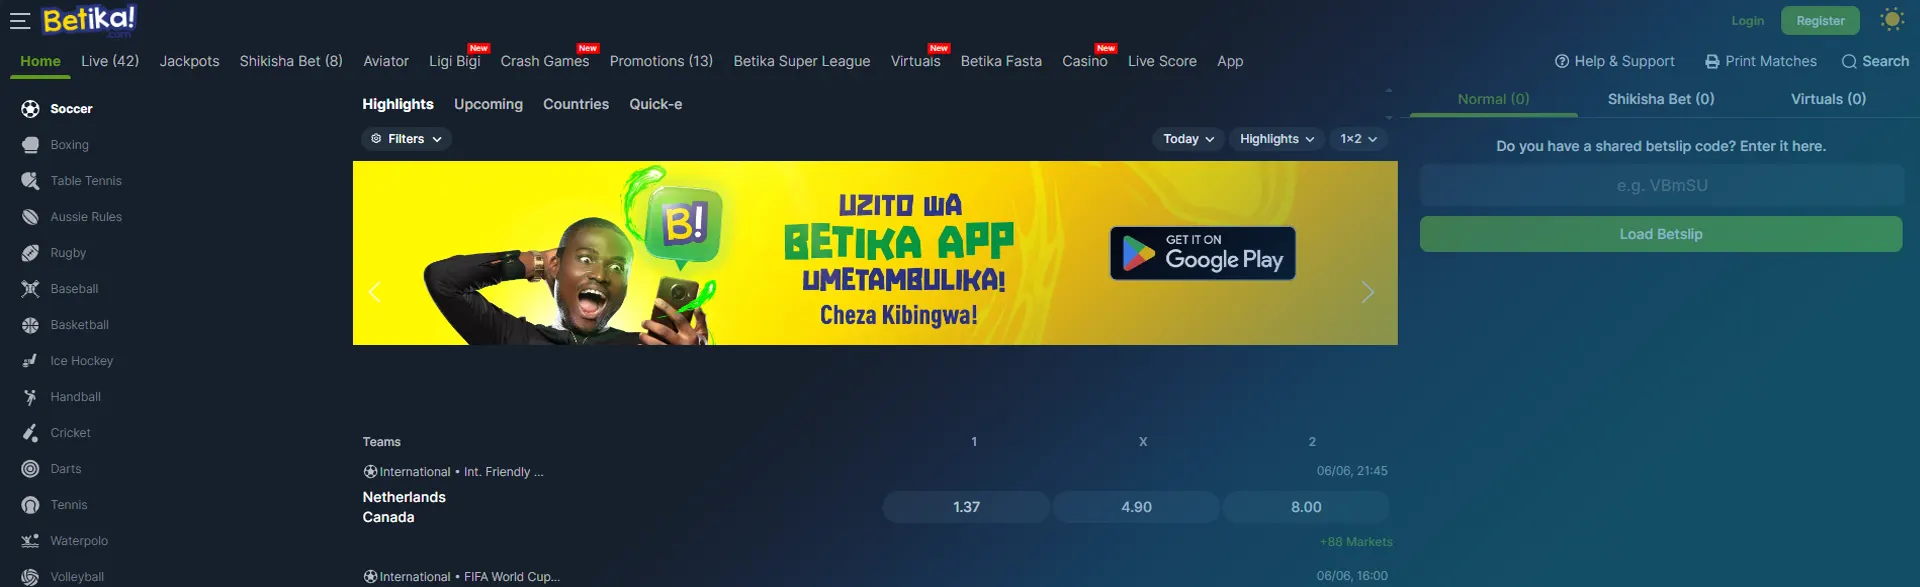 Overview of the notification about the possibility of downloading mobile app from Betika.